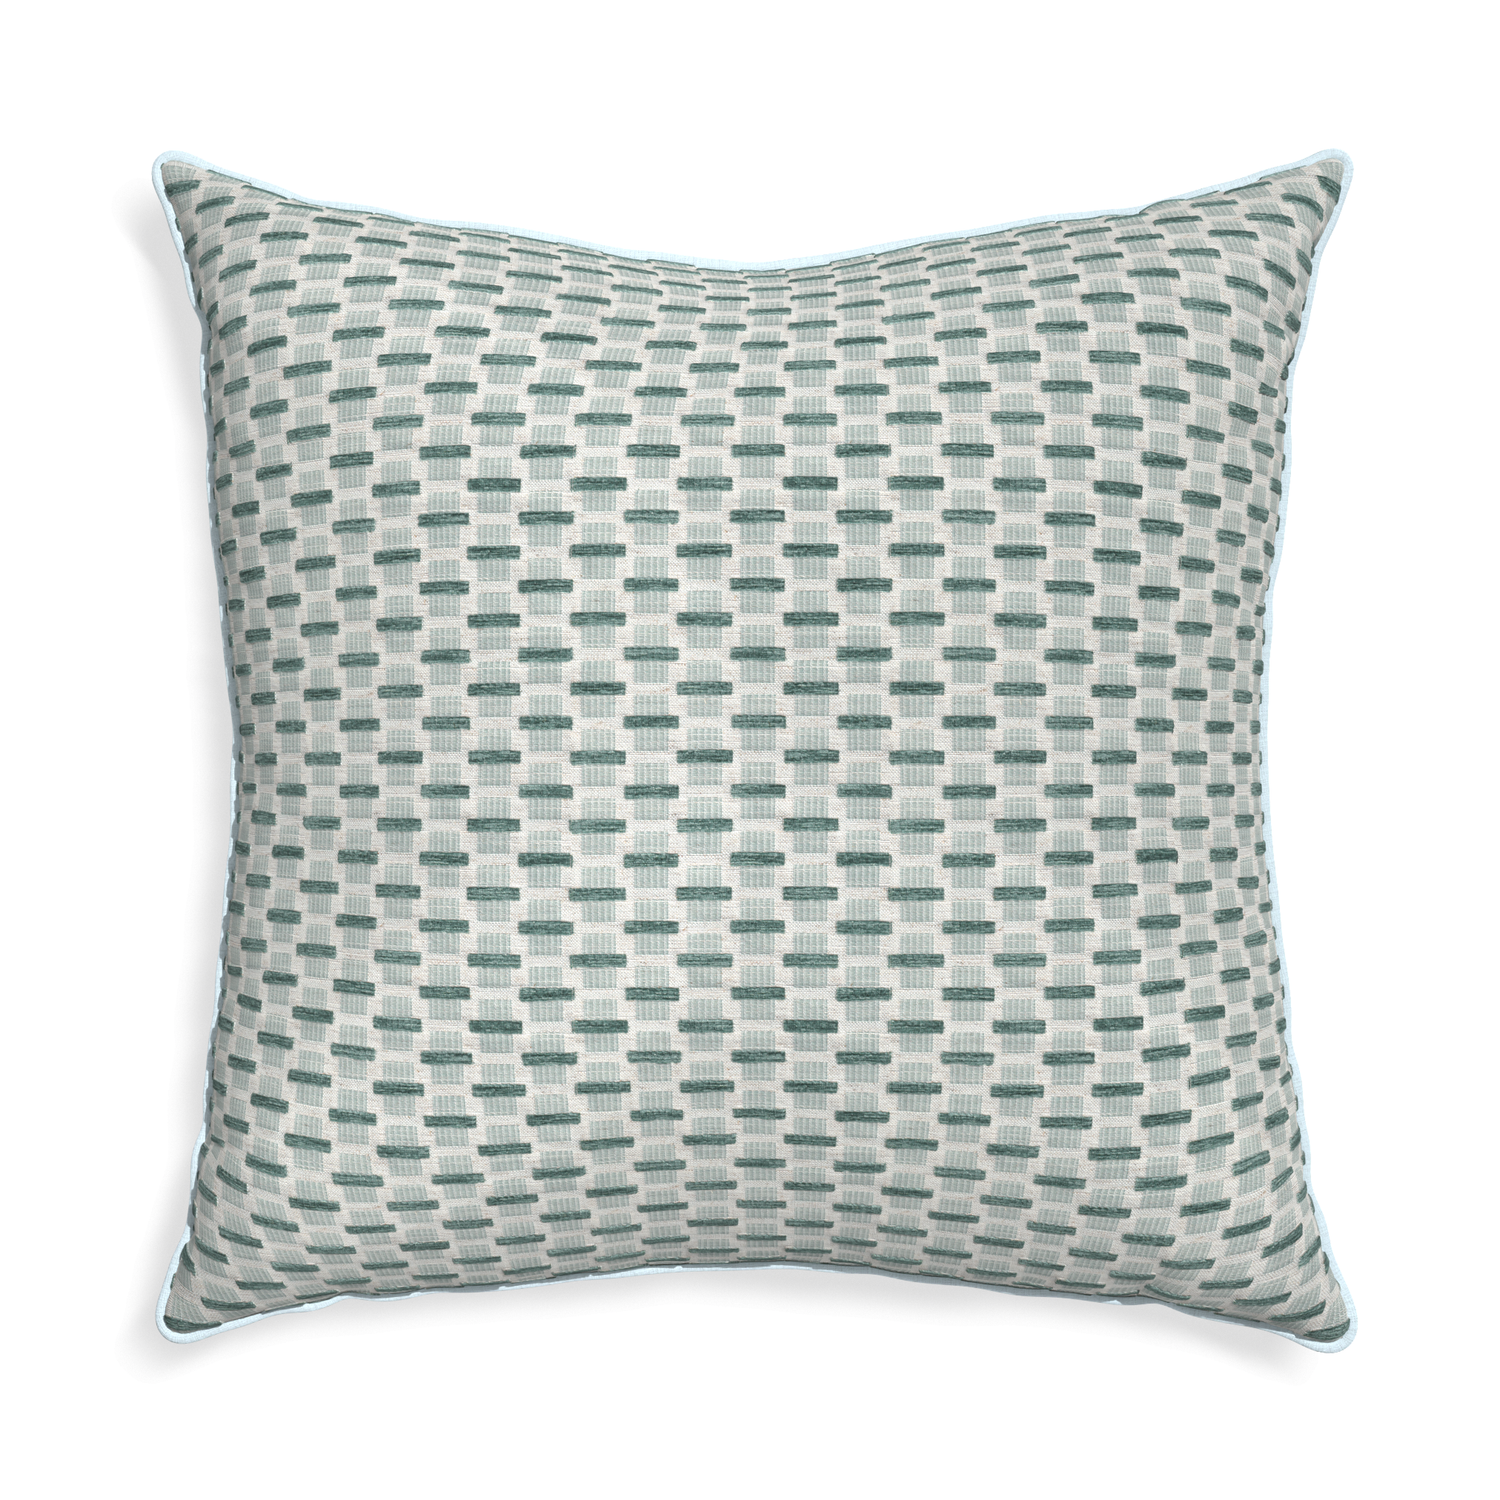 Euro-sham willow mint custom green geometric chenillepillow with powder piping on white background